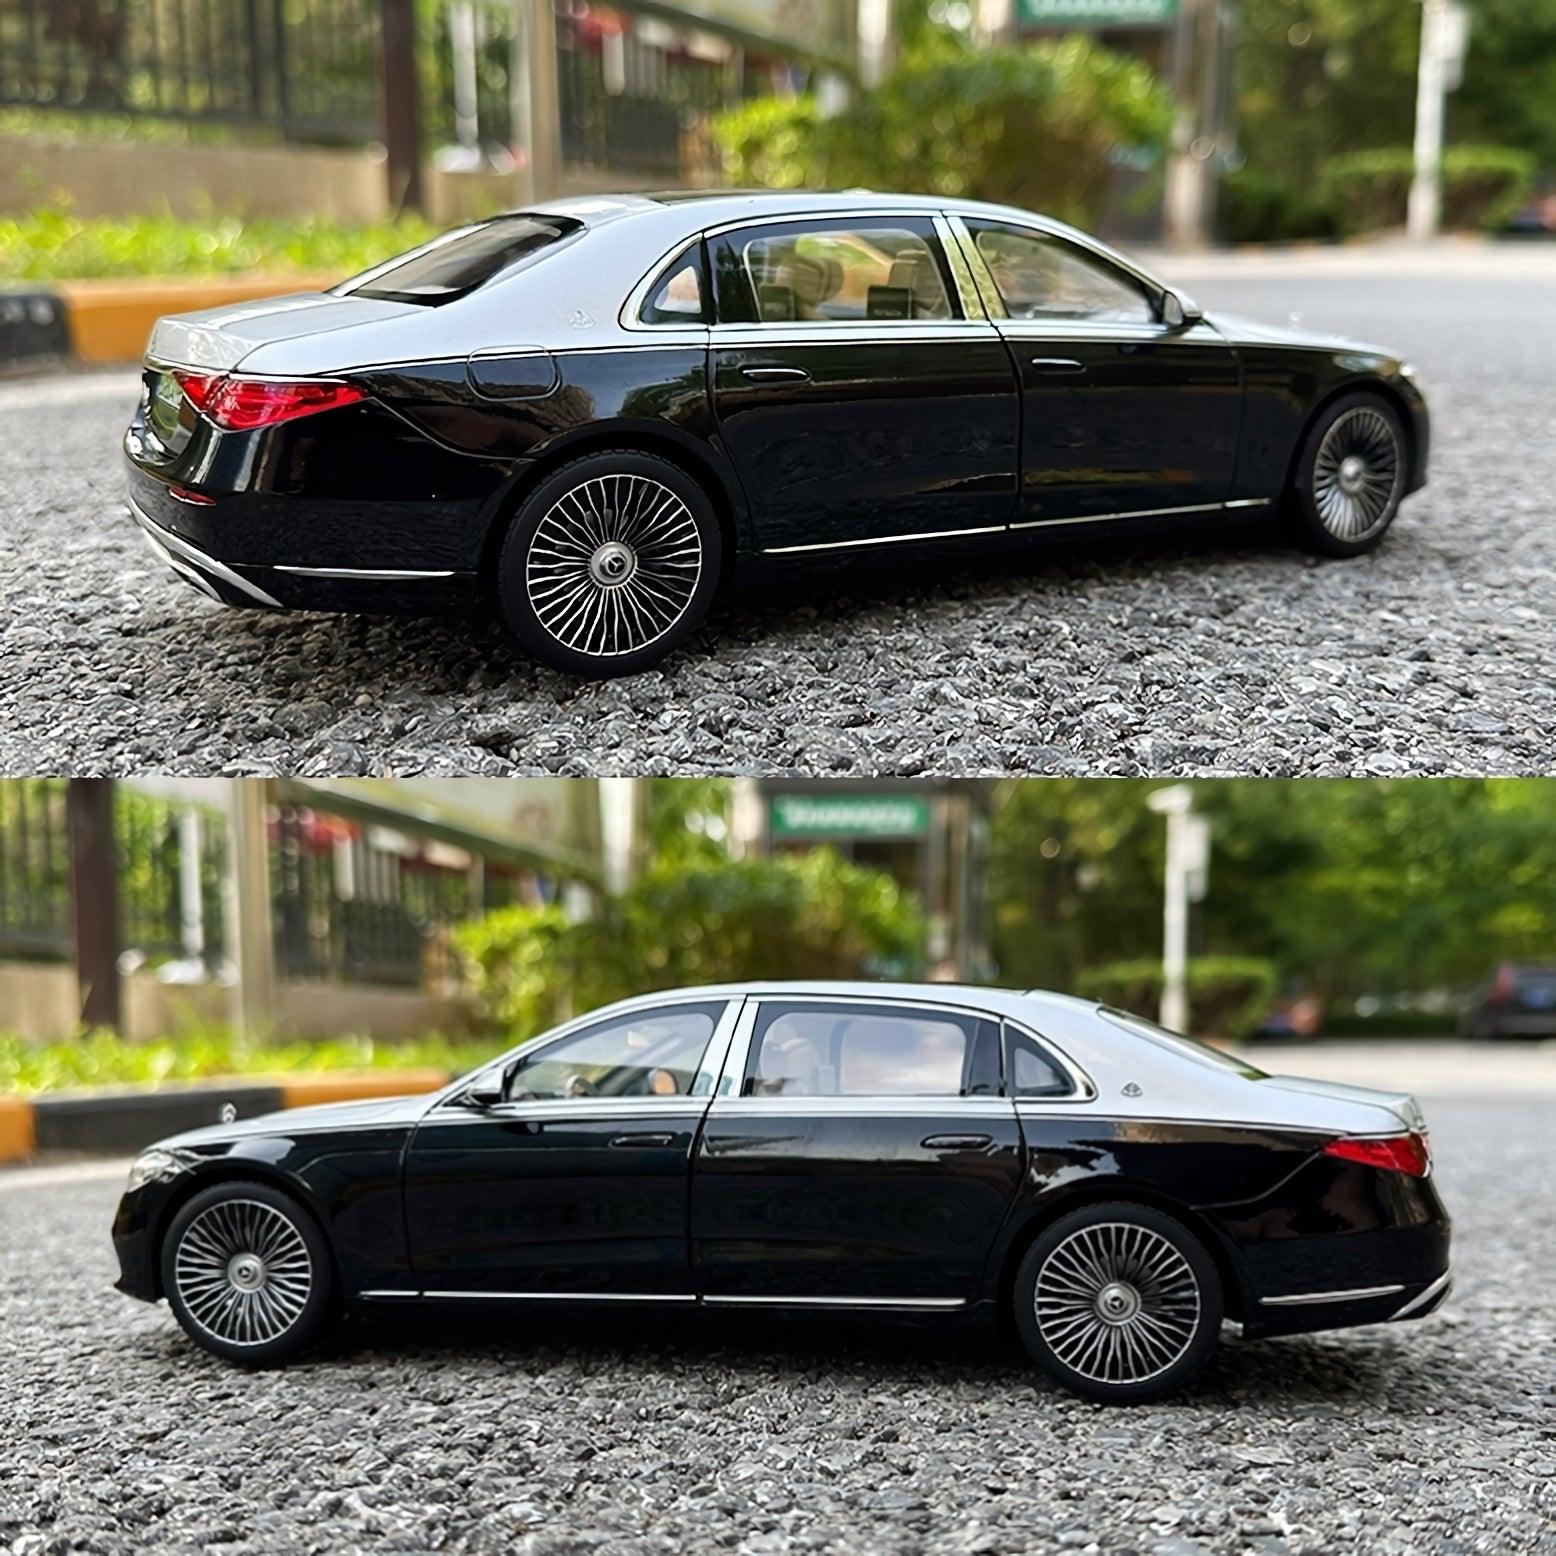 1:18 Scale Maybach Benz S680 Exquisite Die-Cast Model Car - PANSEKtoy